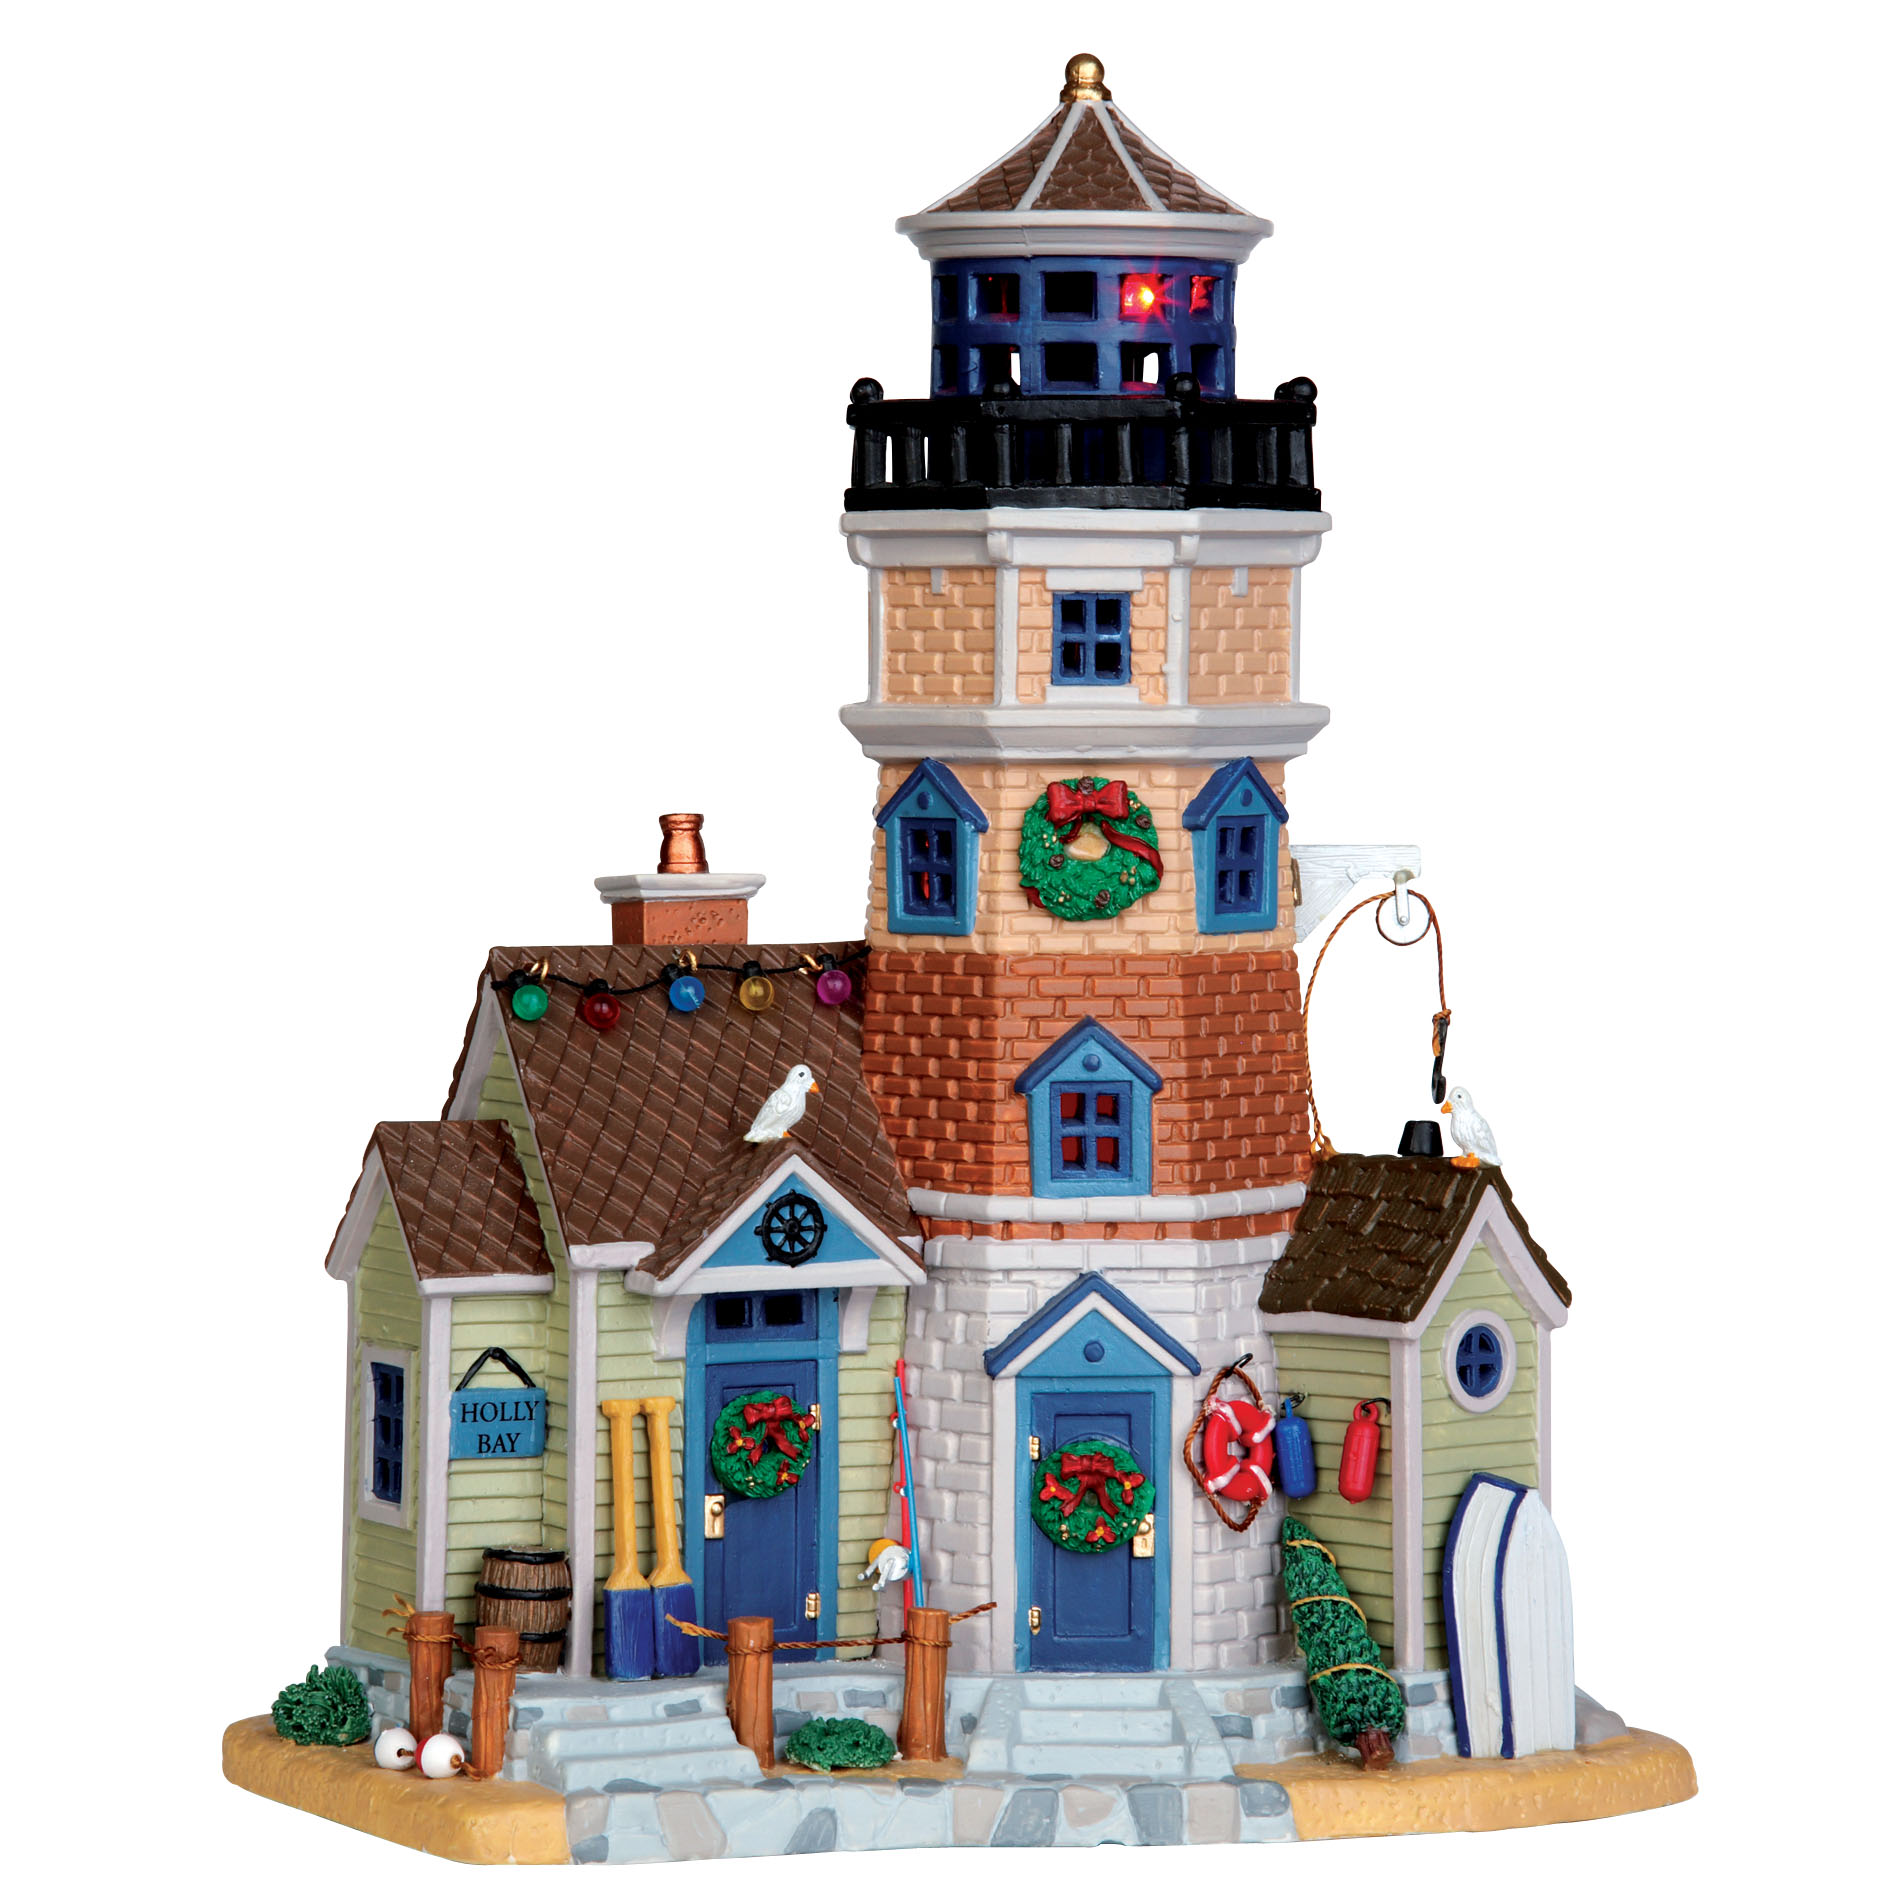 Lemax Village Collection Christmas Village Building, Holly Bay Lighthouse, With 4.5V Adaptor